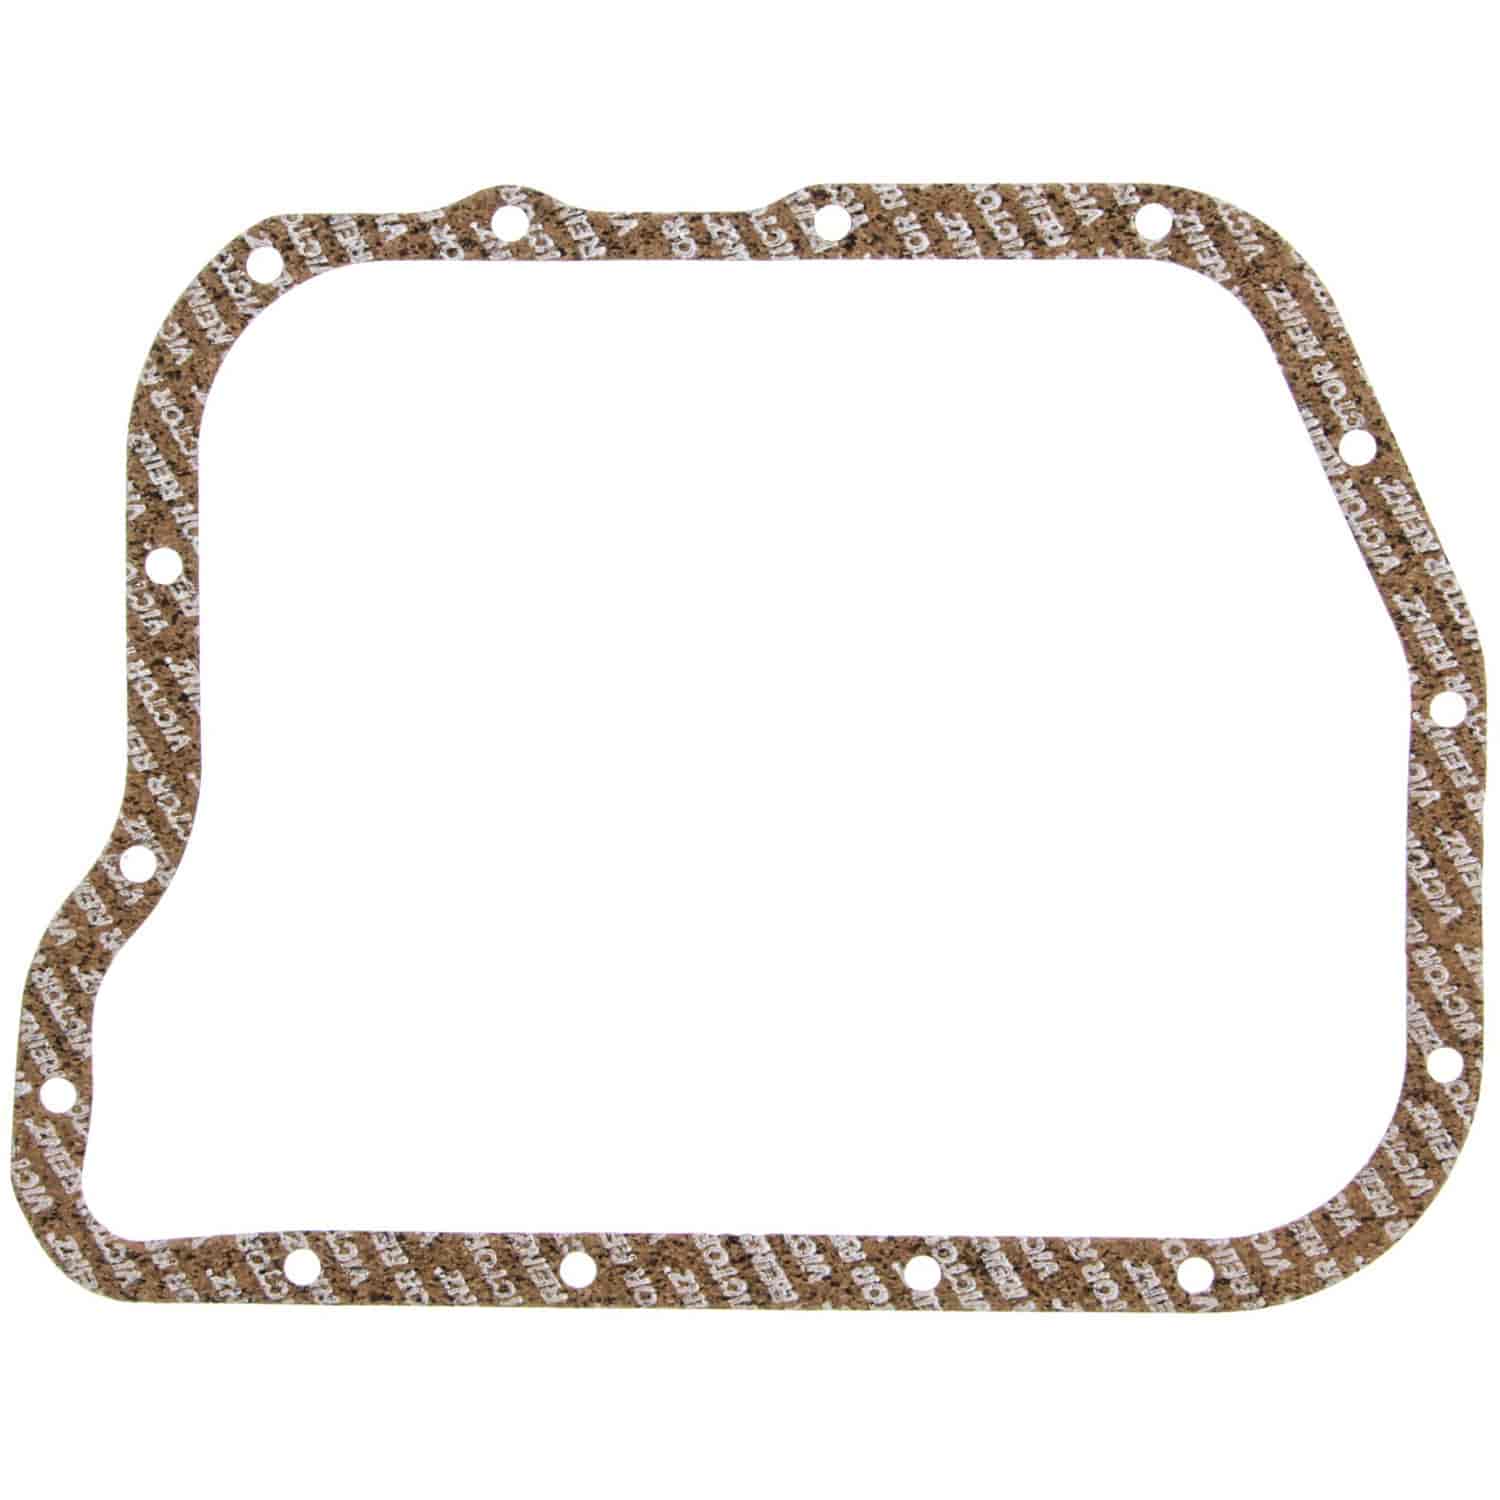 Automatic Transmission Gasket 1962-2003 Chrysler A727/T307 in Cork with Metal Carrier